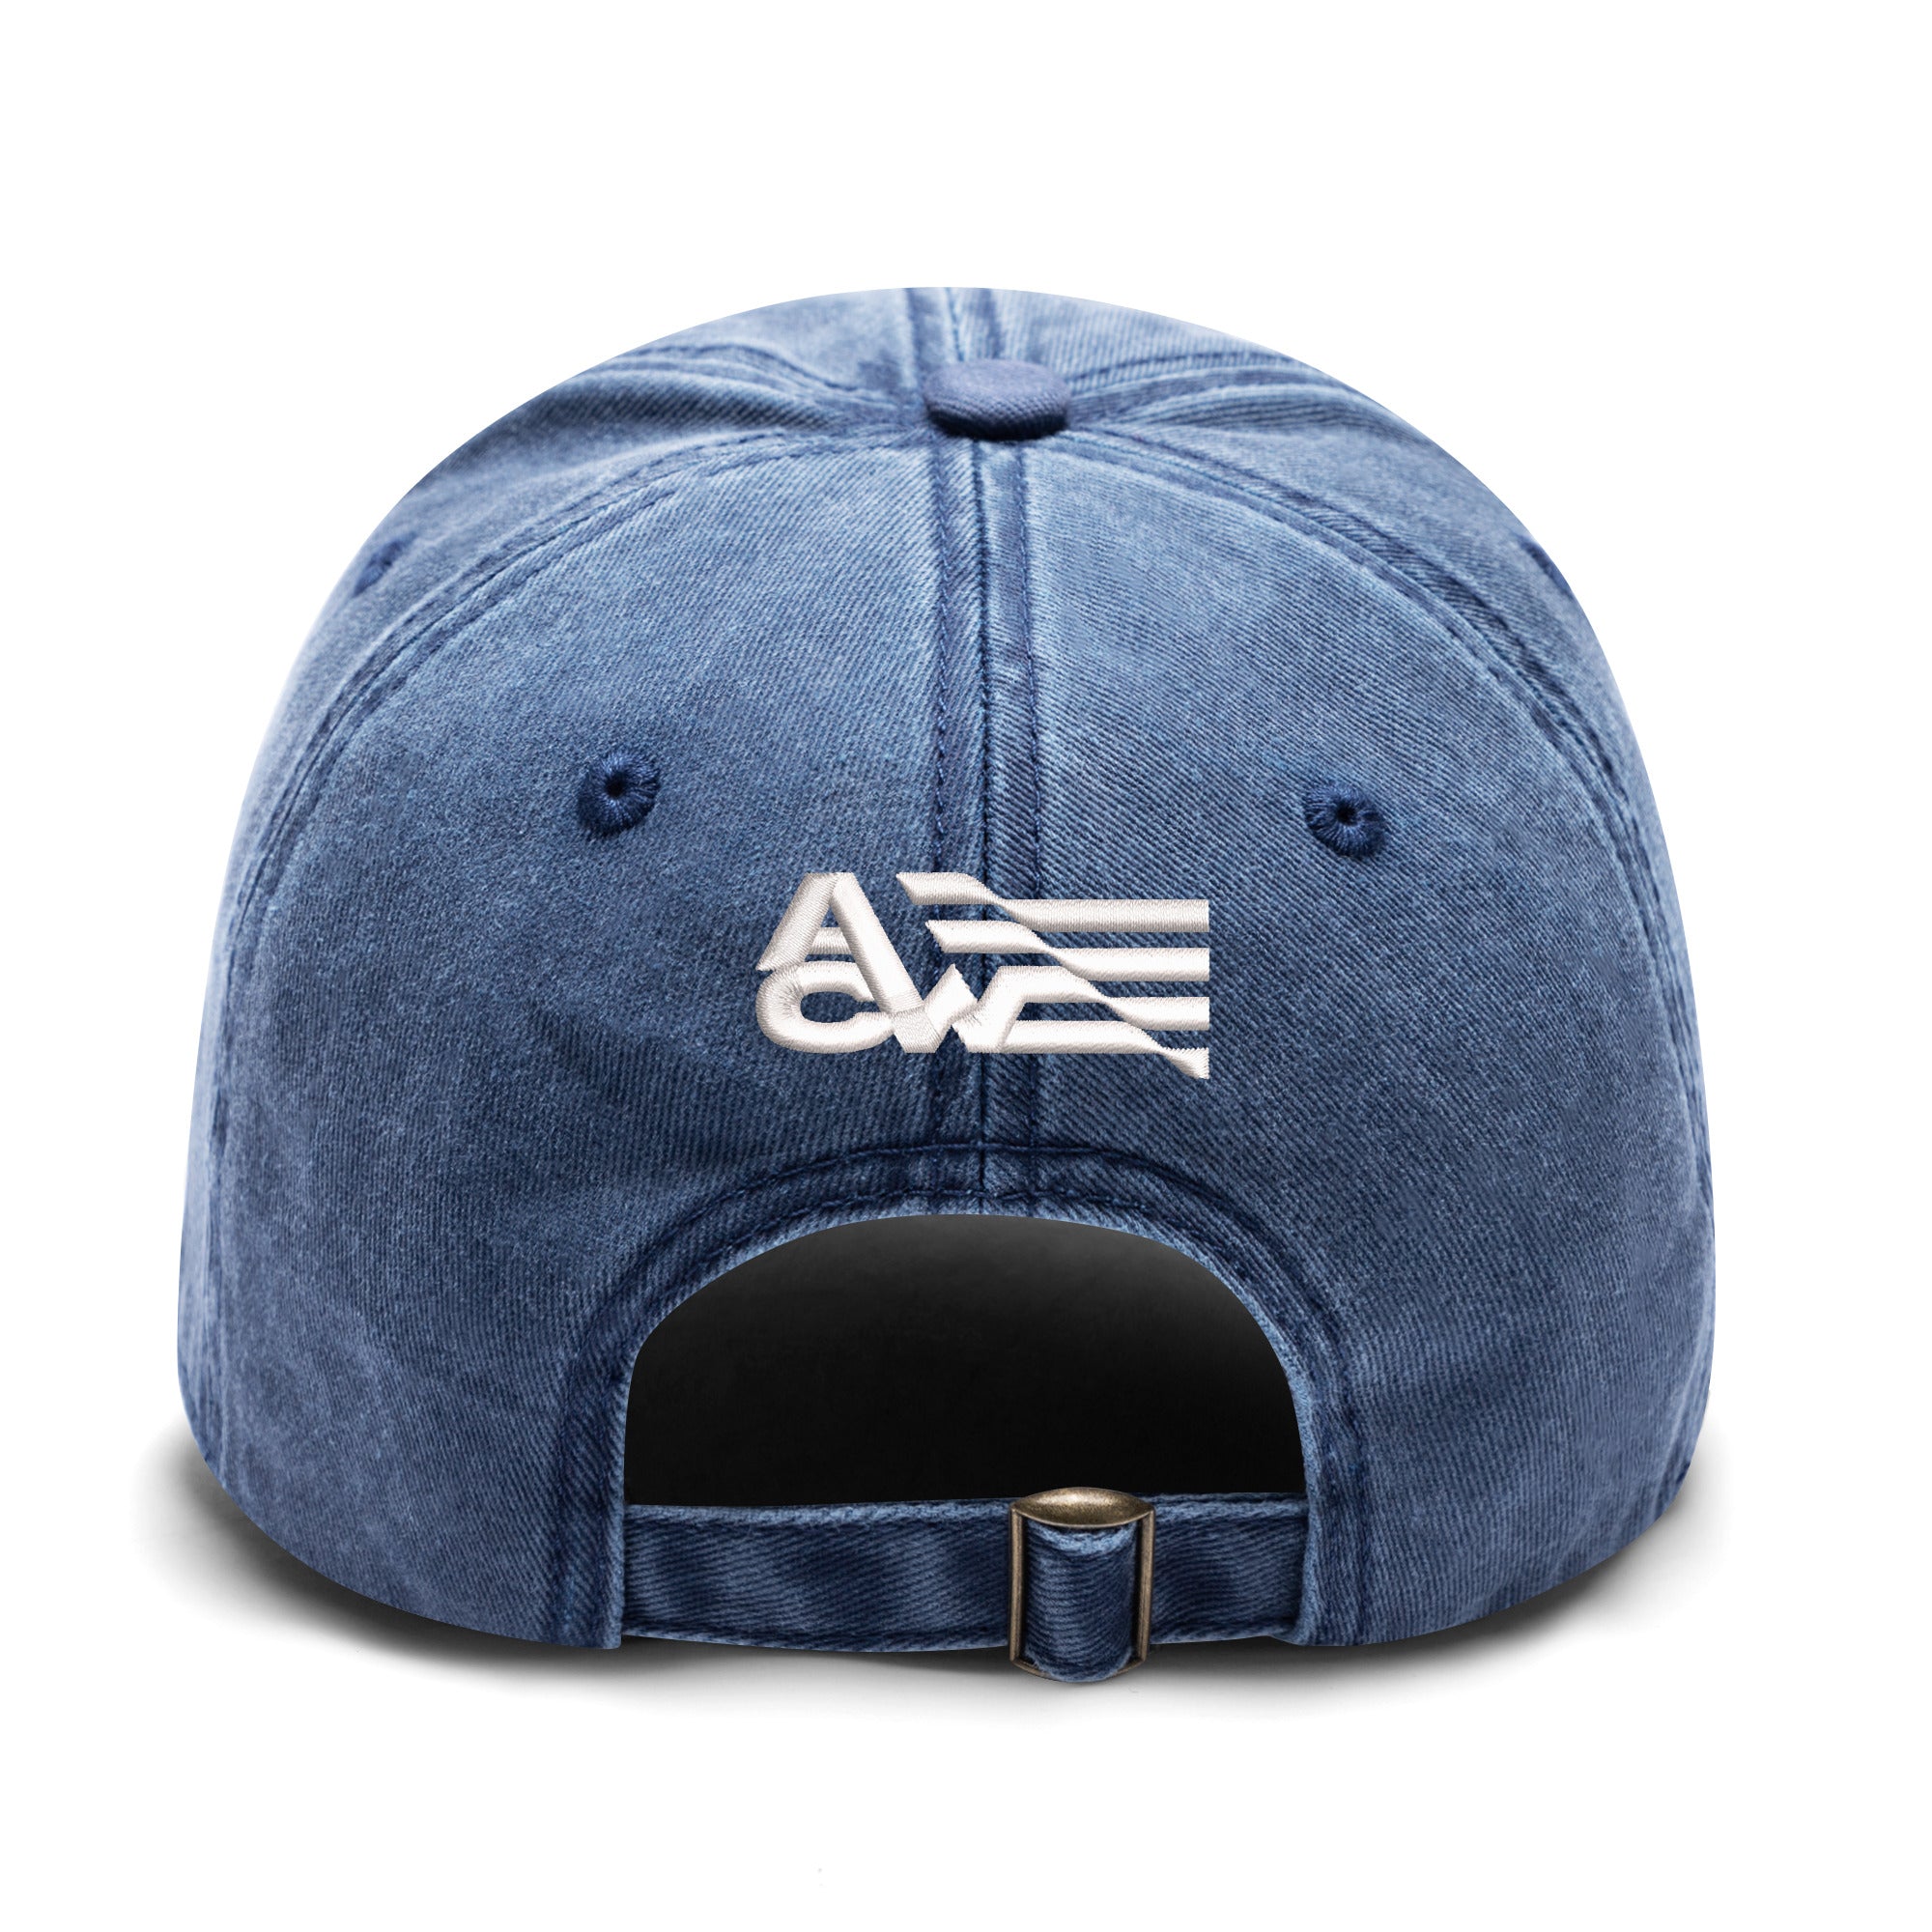 I Want All The Smoke Four Sides Embroidered Denim Baseball Caps